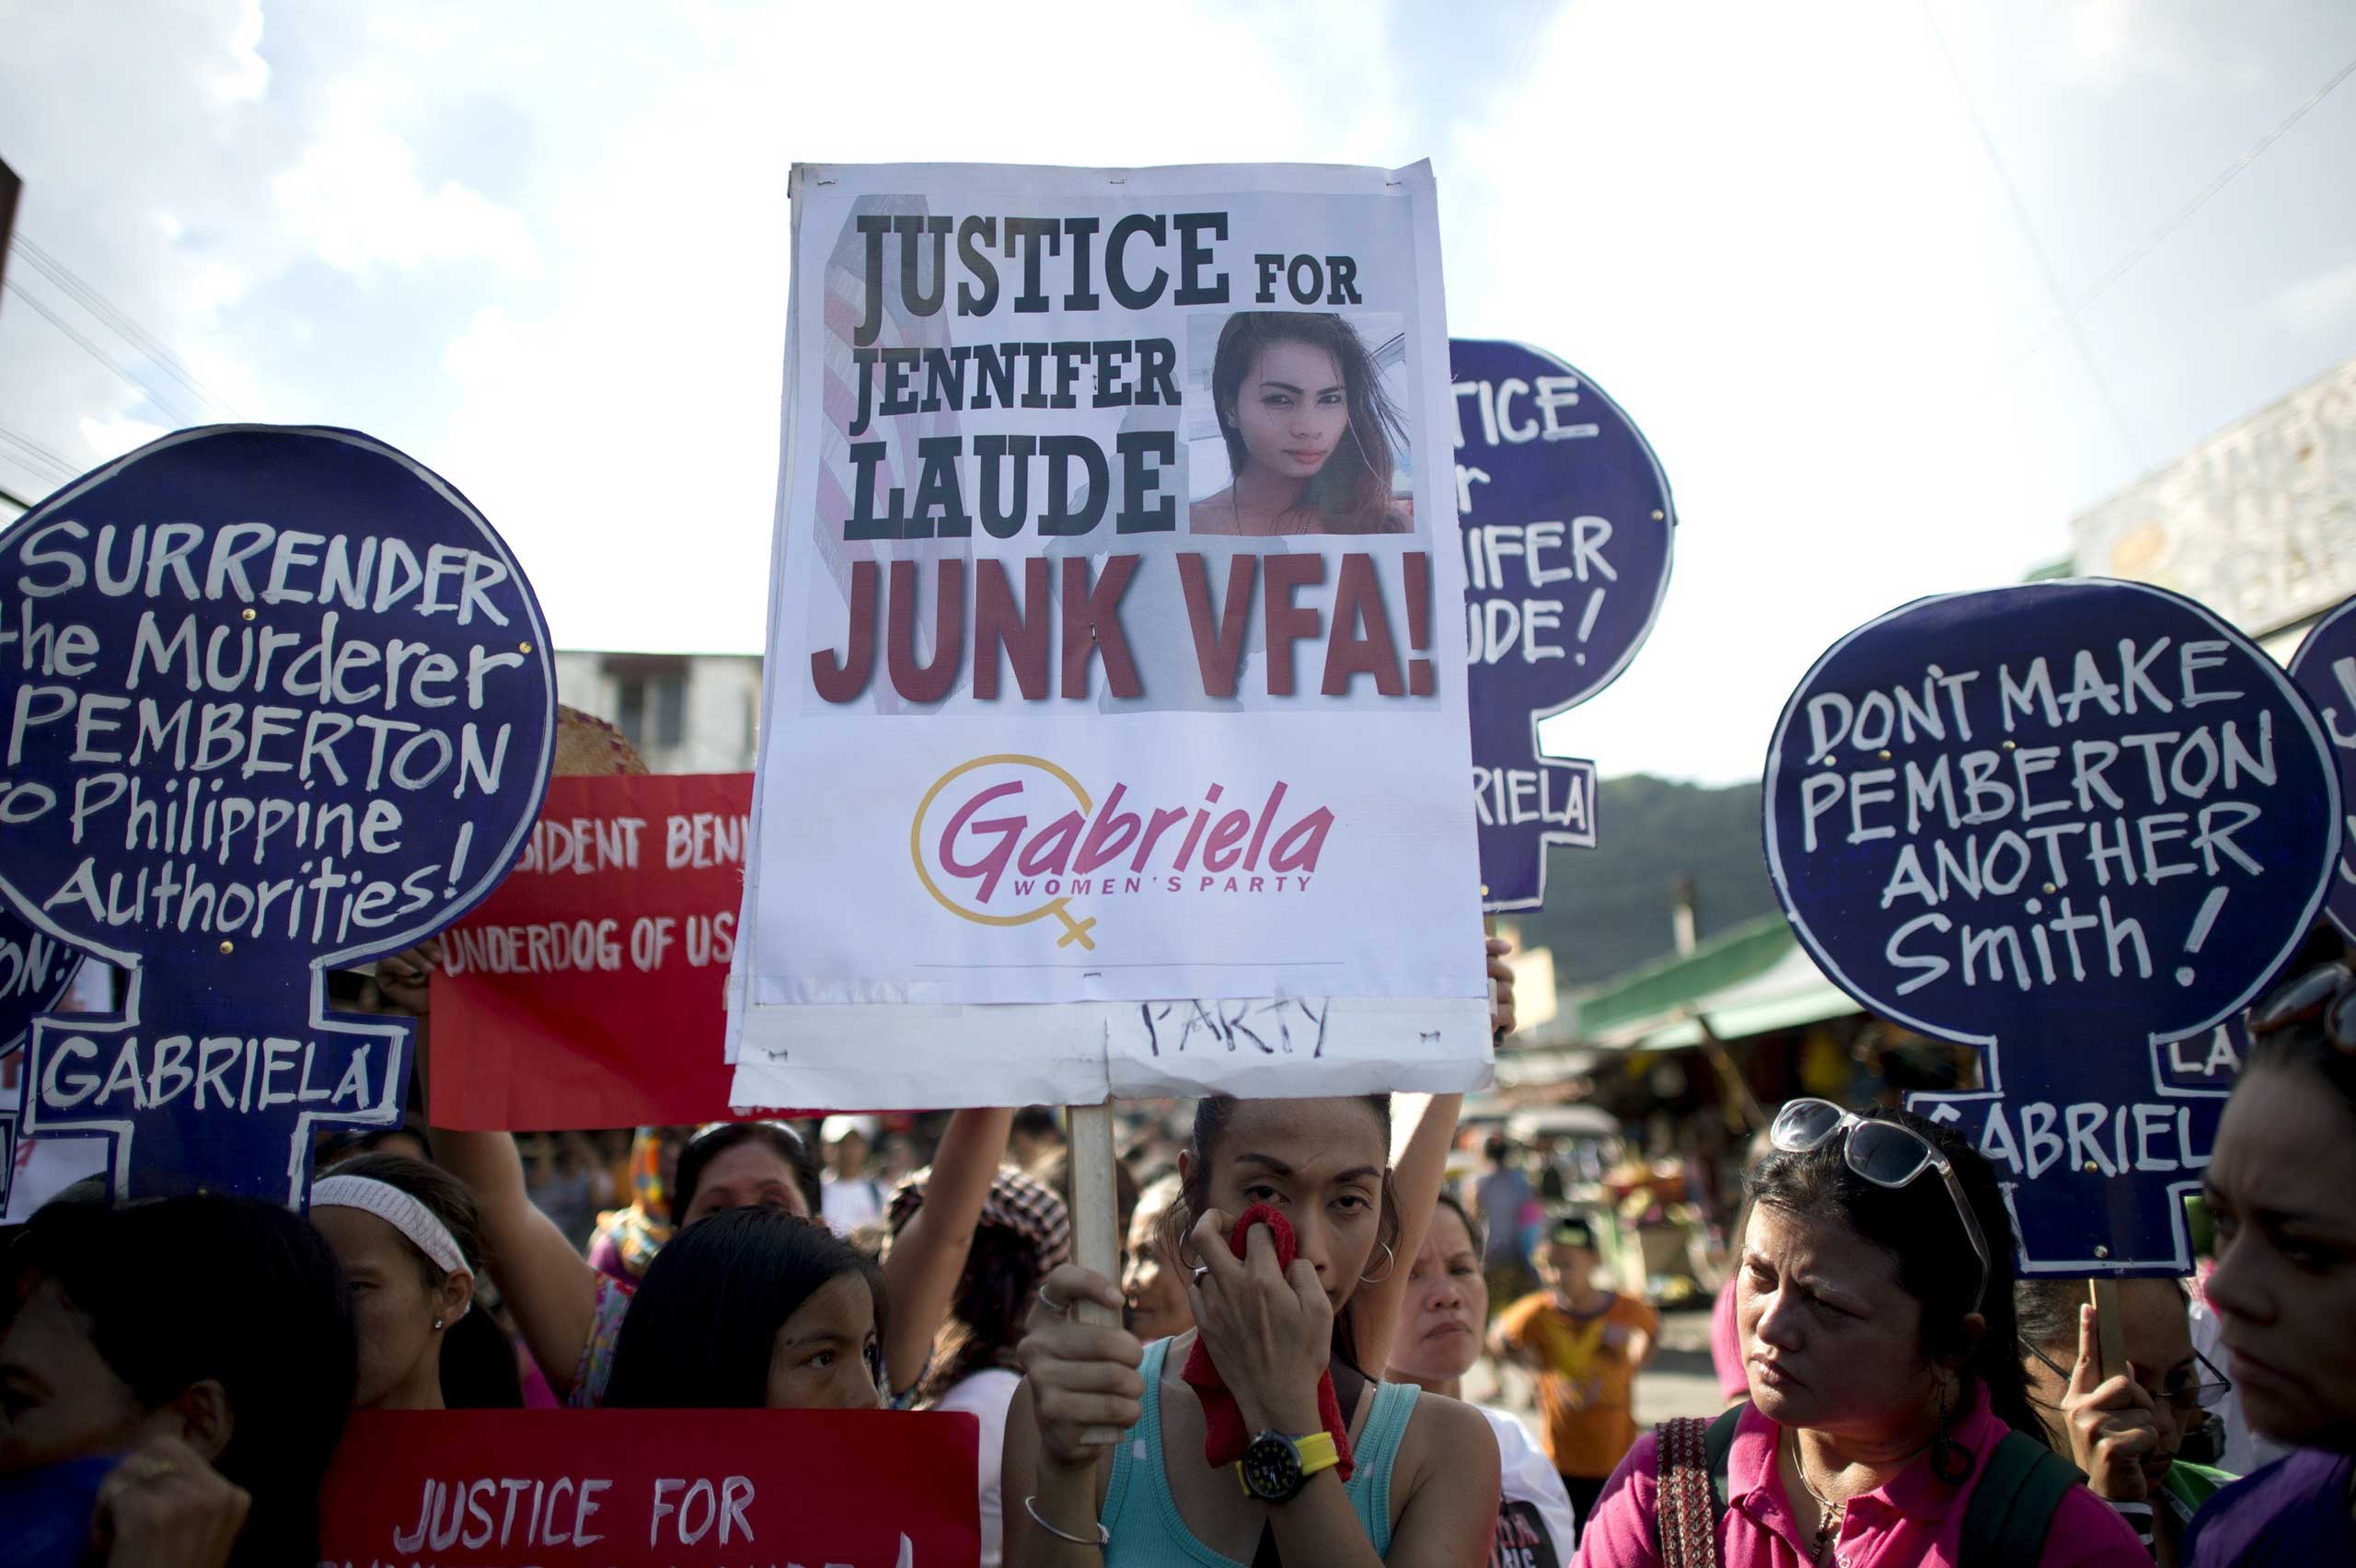 Supporters of murdered Filipino transgender Jeffrey Laude, also known as "Jennifer", hold a protest near the Hall of Justice where the preliminary hearing for the murder case is being held at the northern Philippine city of Olongapo on Oct. 10, 2014. (Noel Celis—AFP/Getty Images)